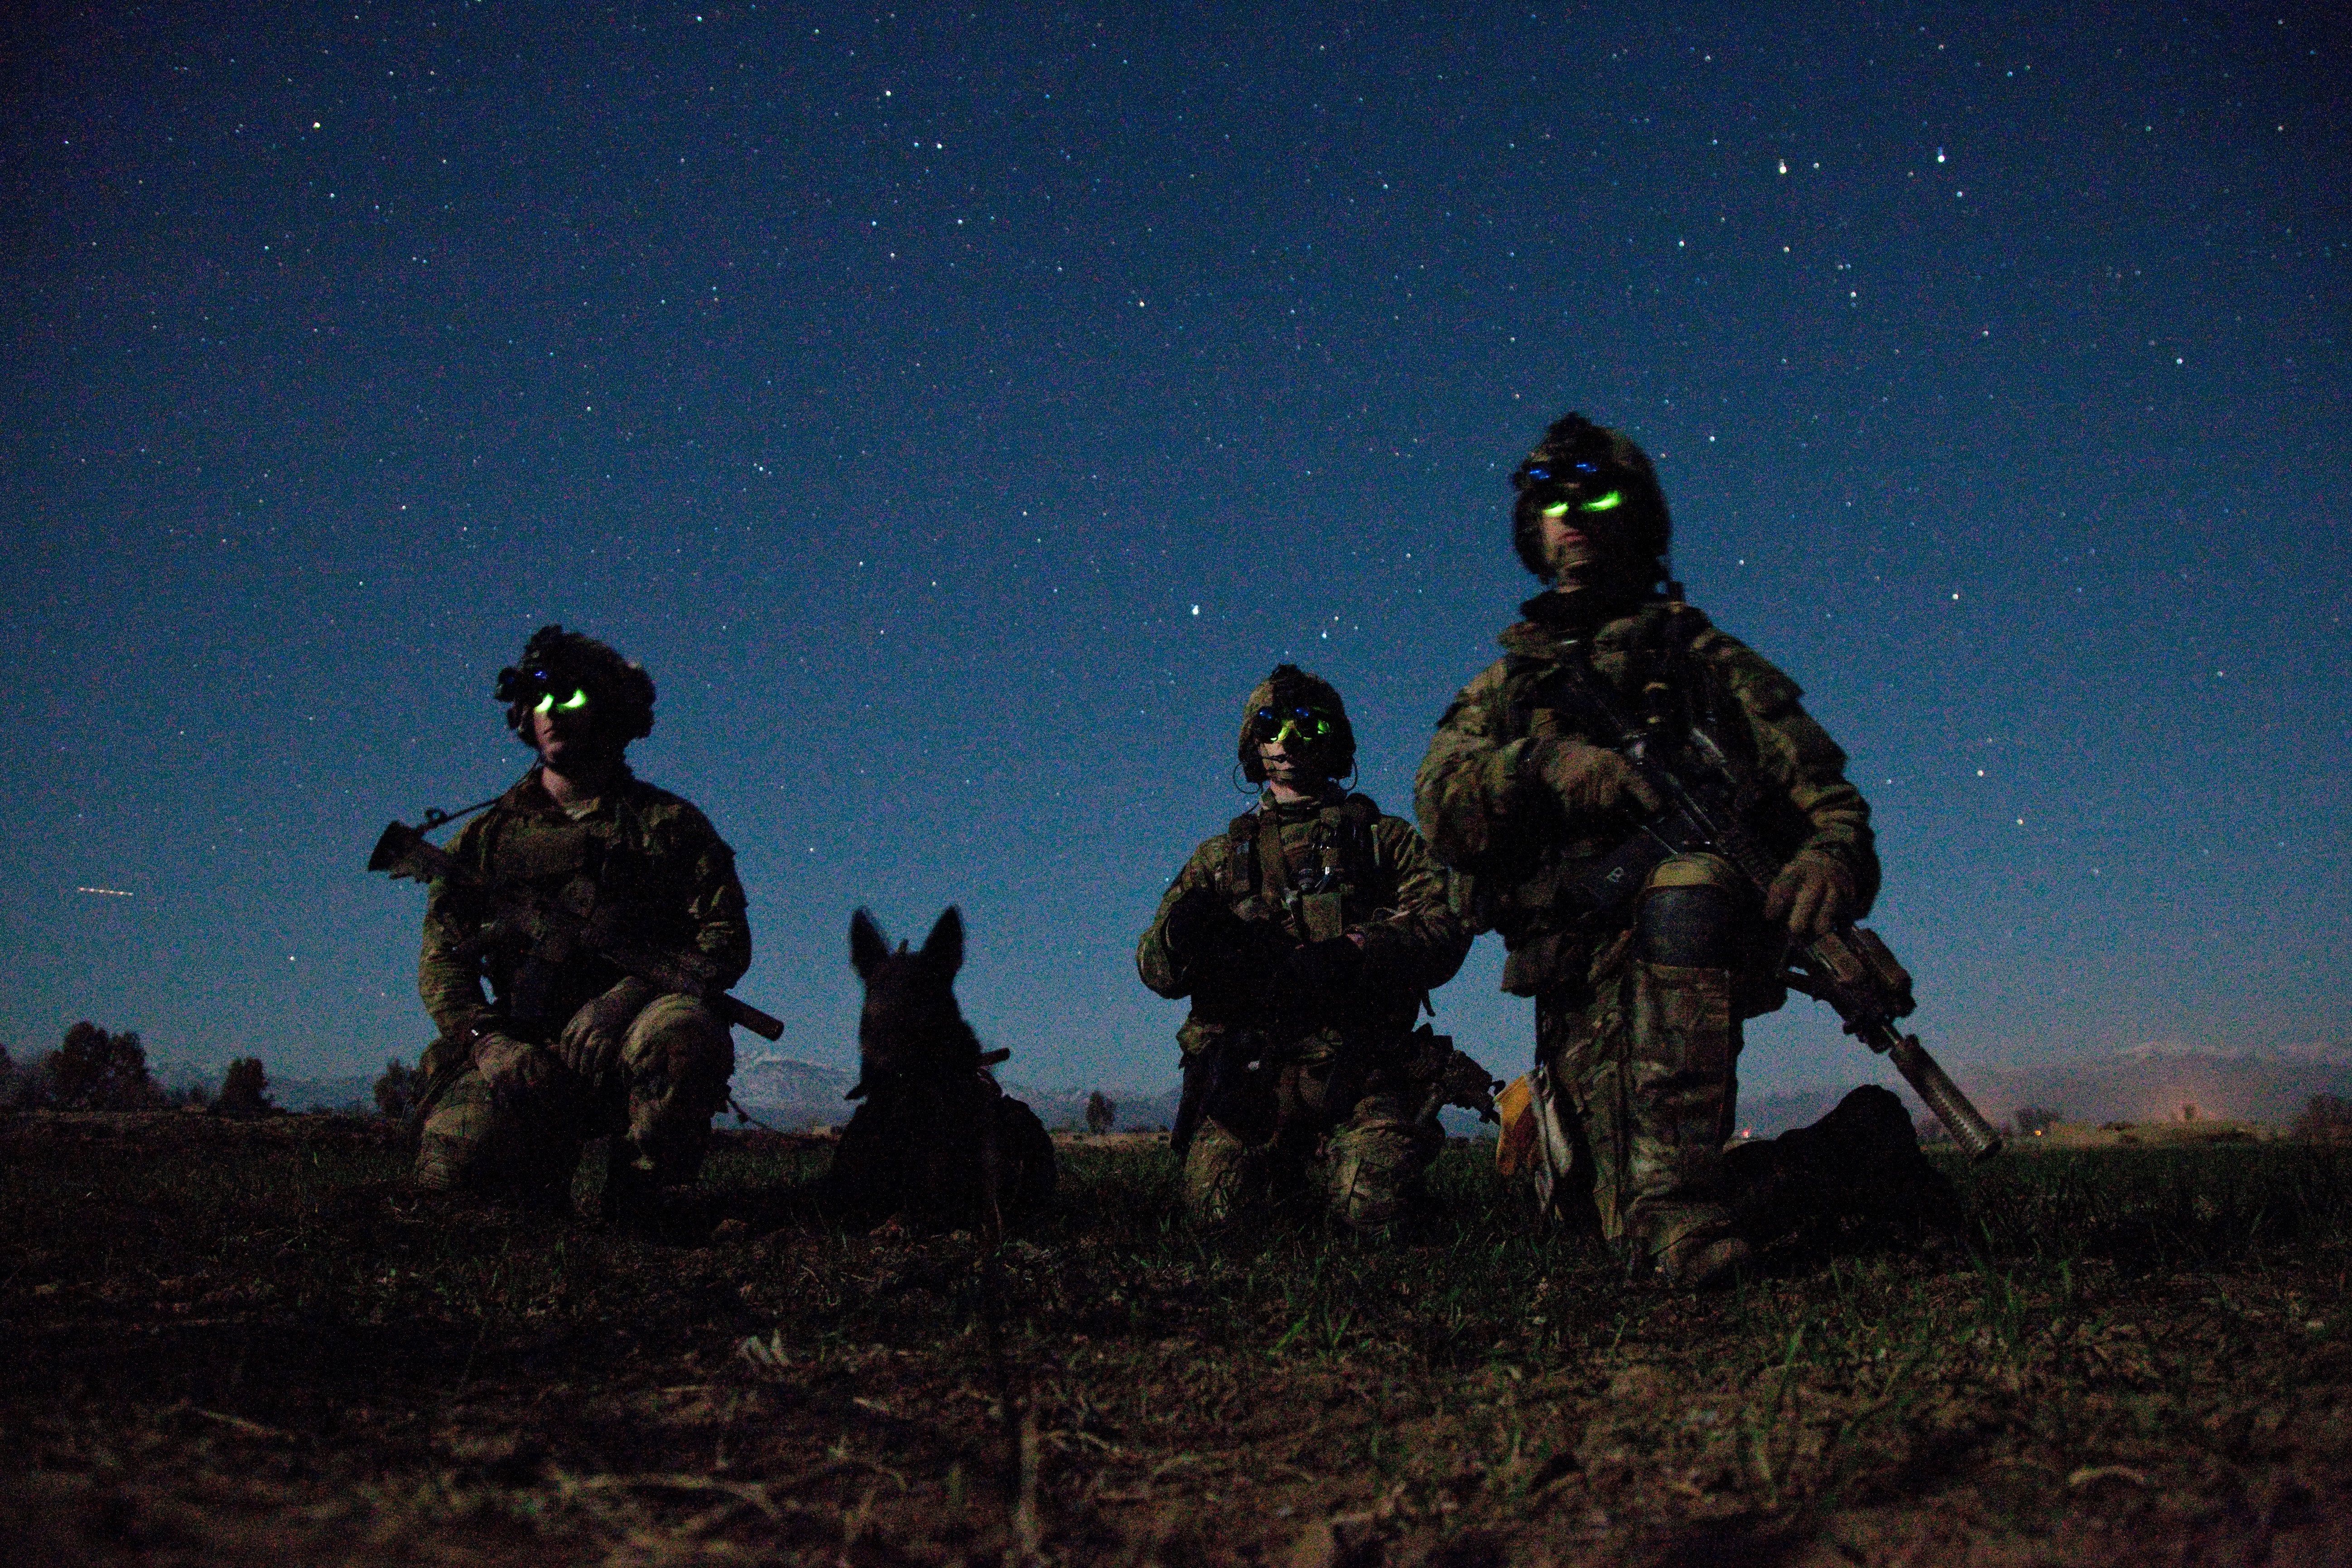 3rd Battalion, 75th Ranger Regiment with a military working dog while on operation in Afghanistan, 2012 [5192x3461]